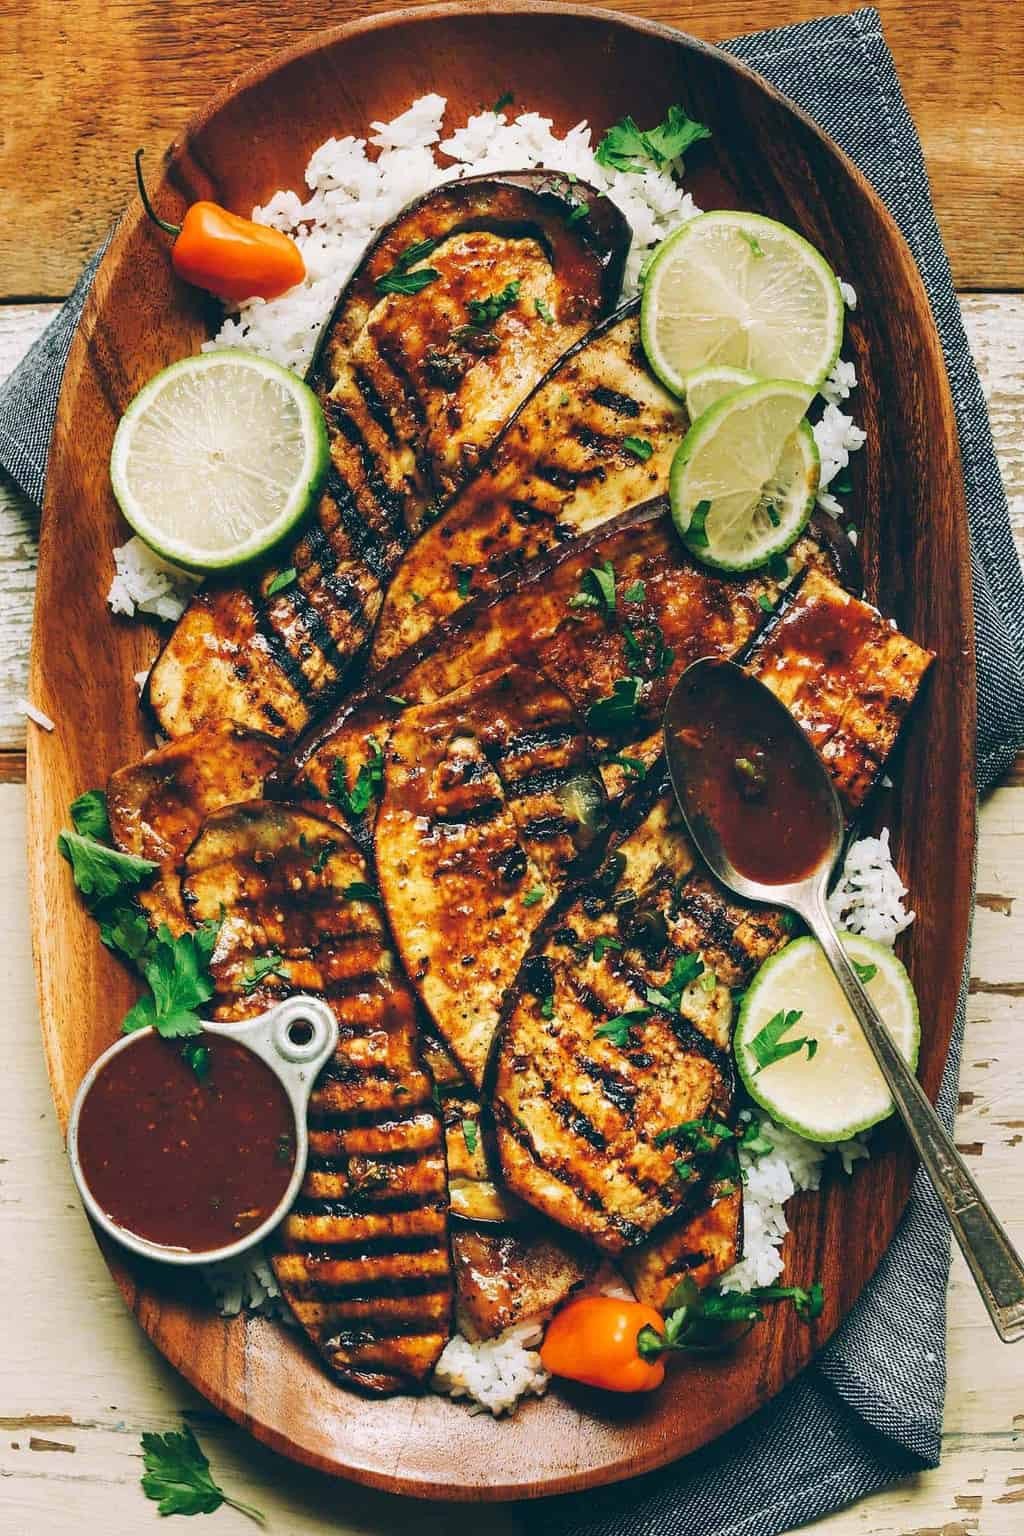 Vegetarian Grill Recipes
 5 Ve arian Grilling Recipes That Won t Disappoint